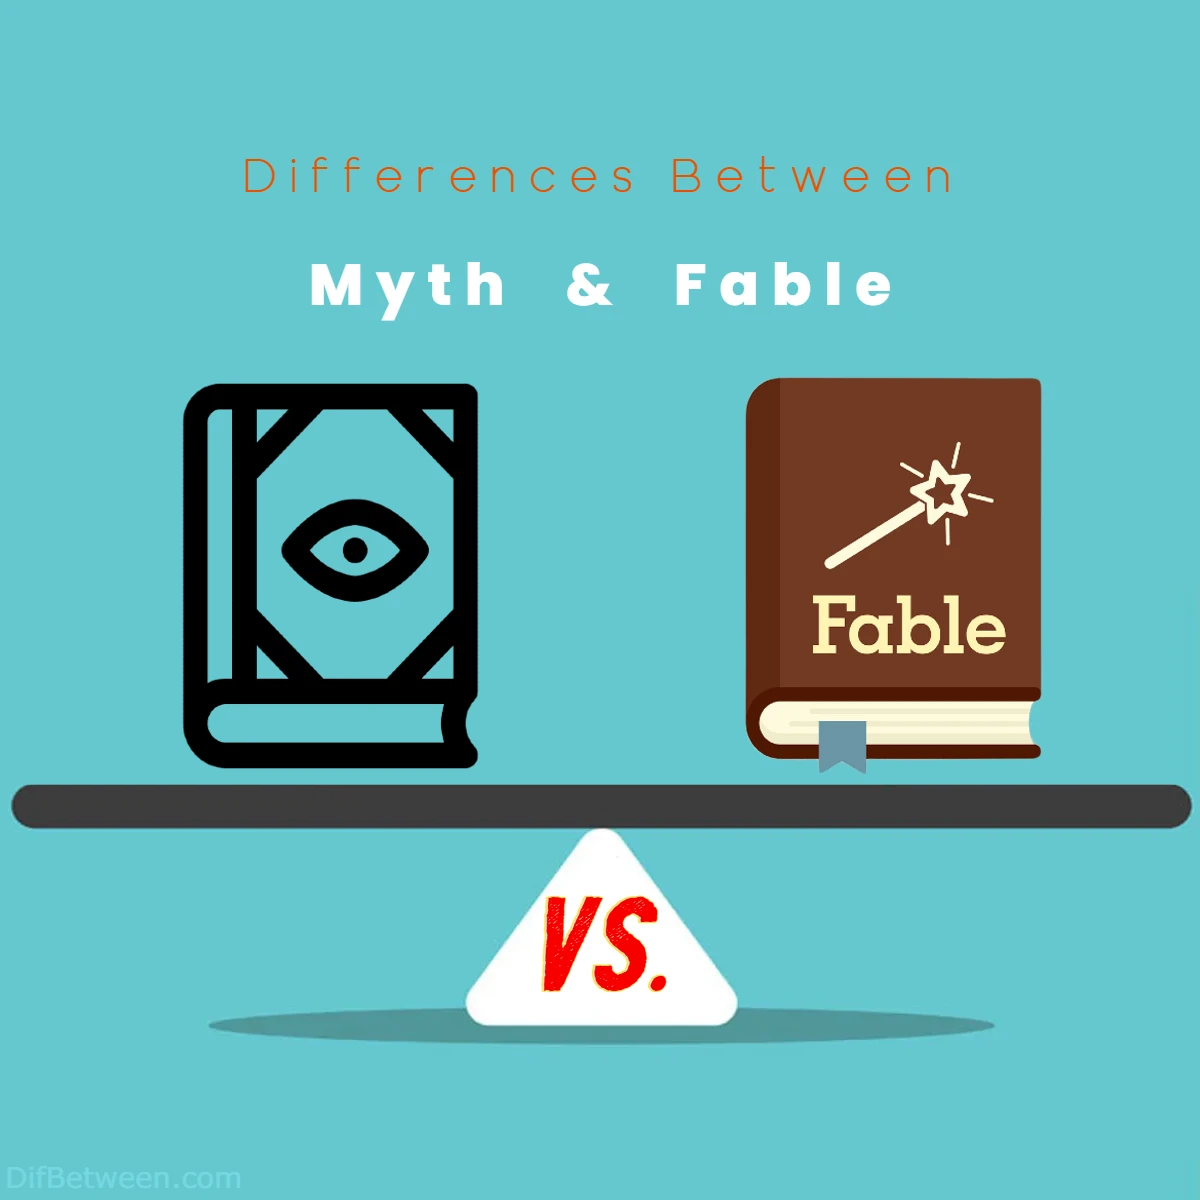 Differences Between Myth vs Fable